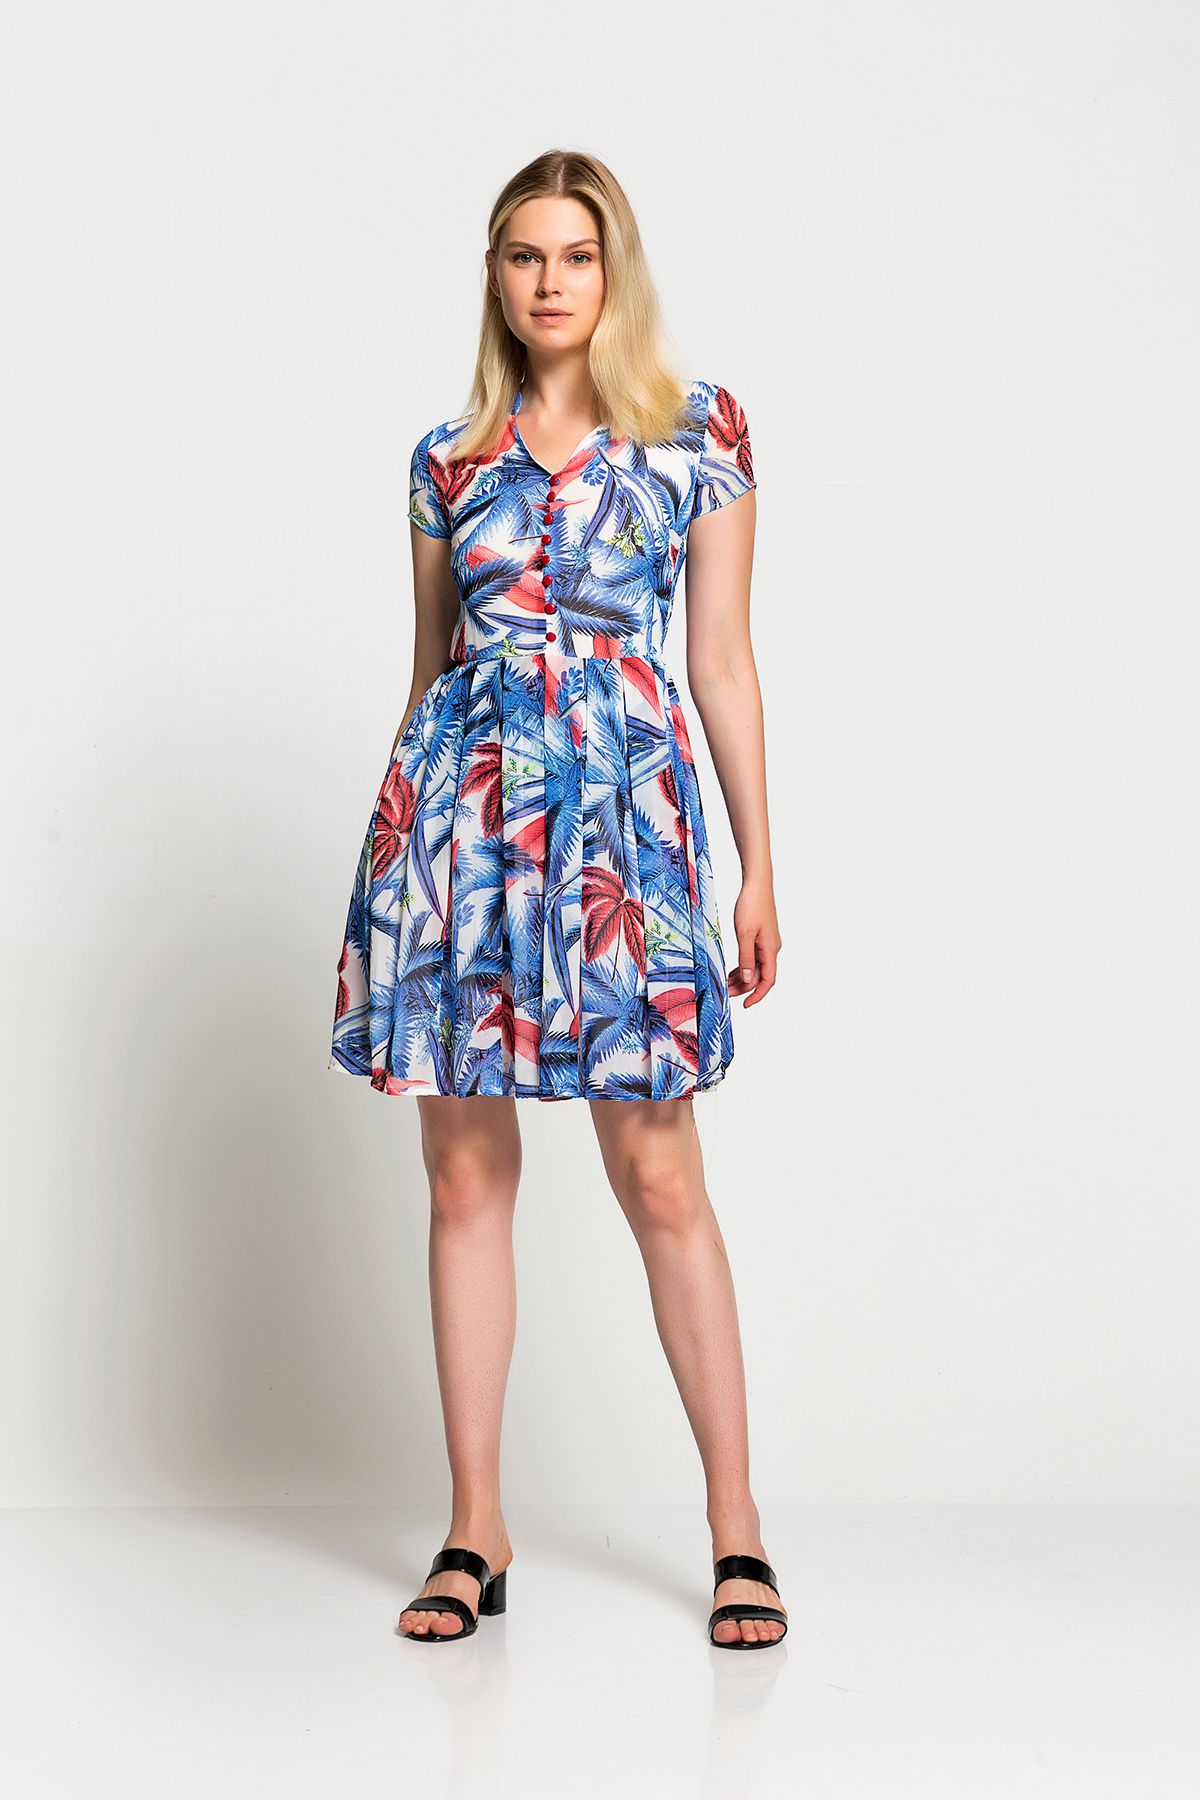 Picture of flower Patterned Chiffon Summery Dress